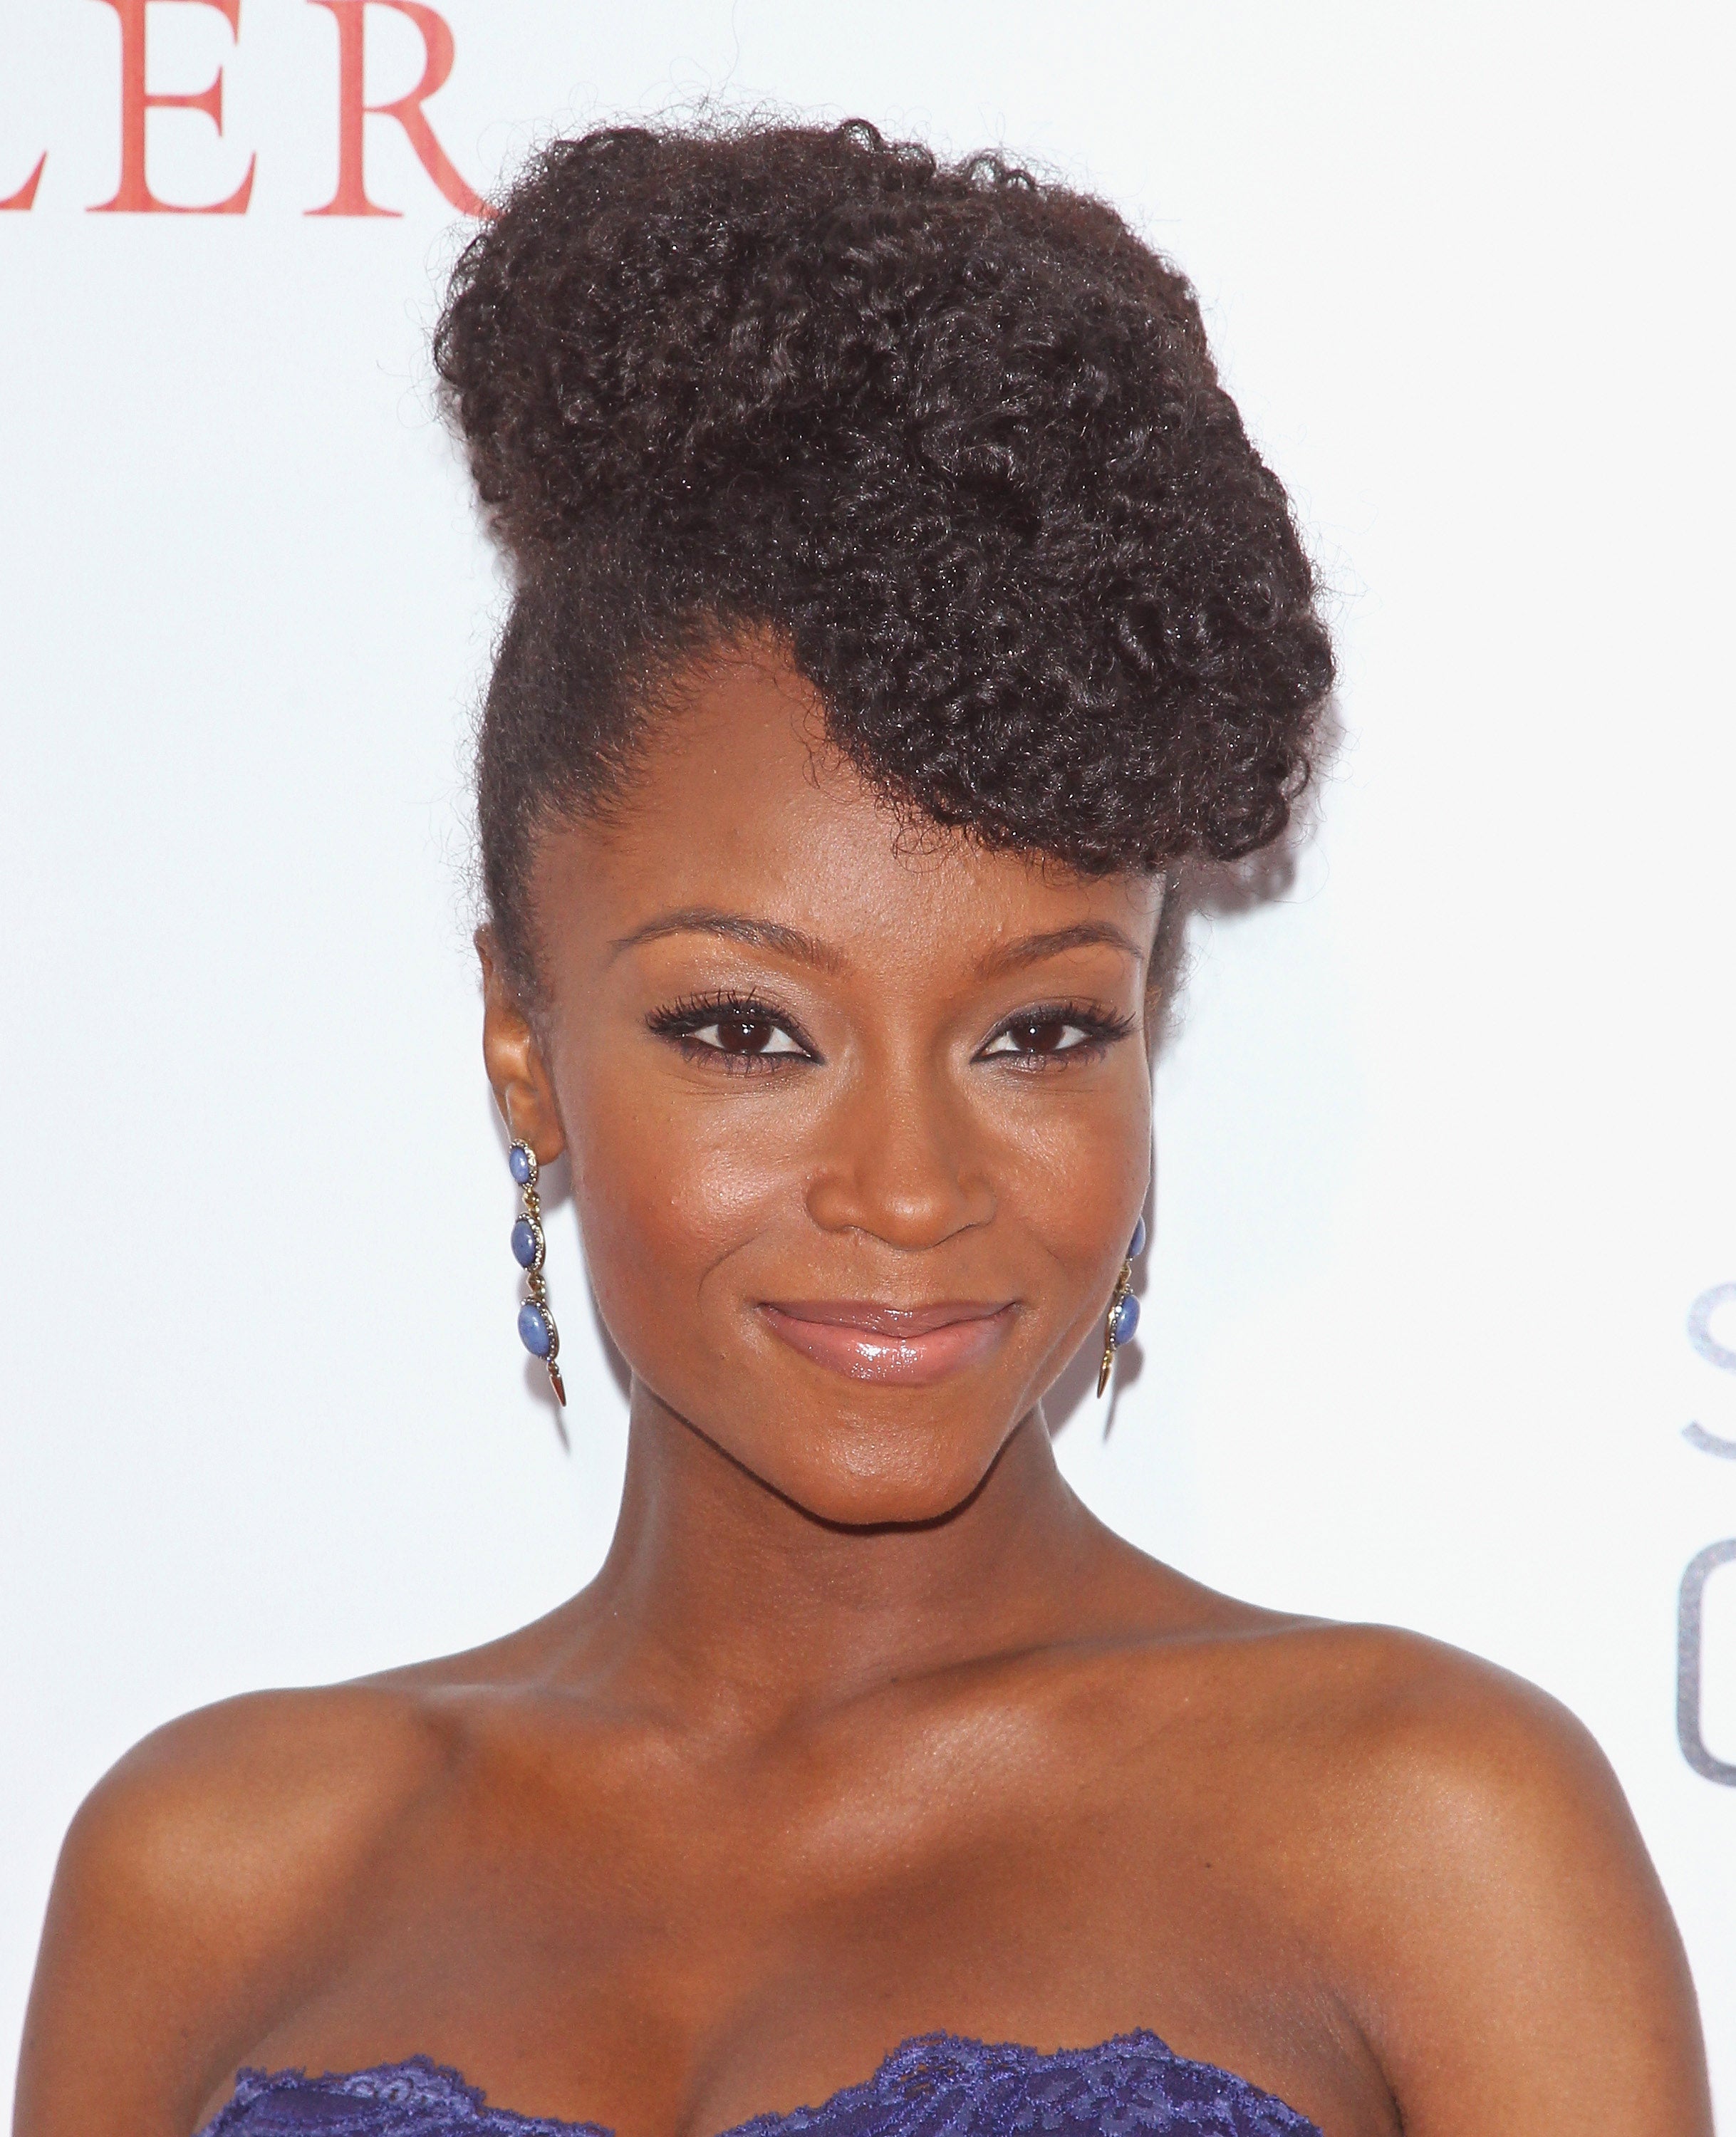 The Best Celeb Natural Updos
